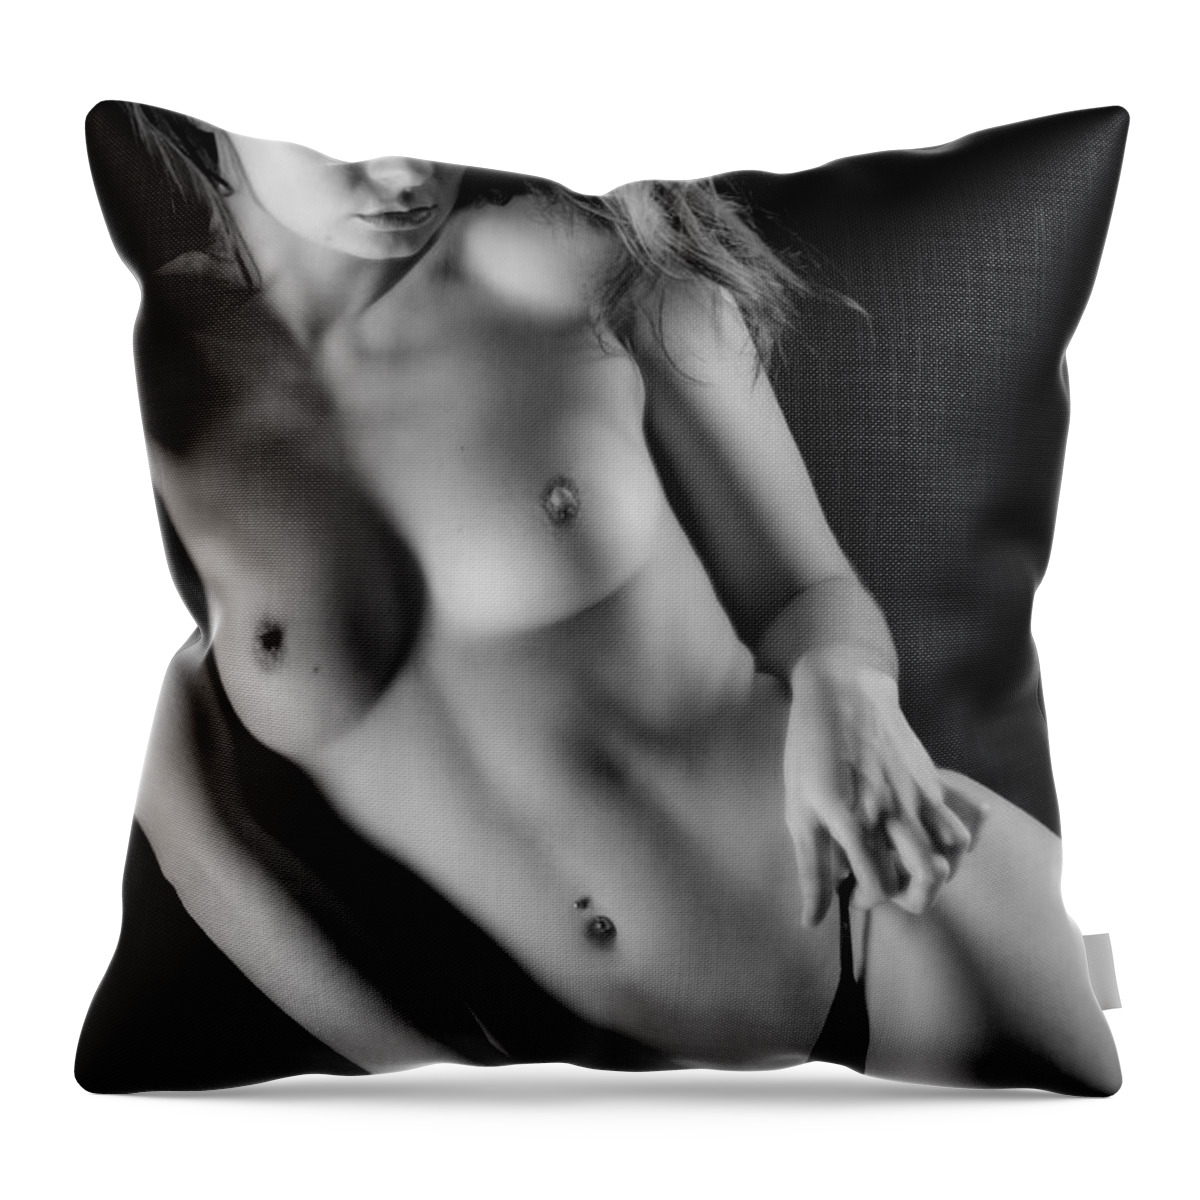 Ralf Throw Pillow featuring the photograph Female Act Bw by Ralf Kaiser